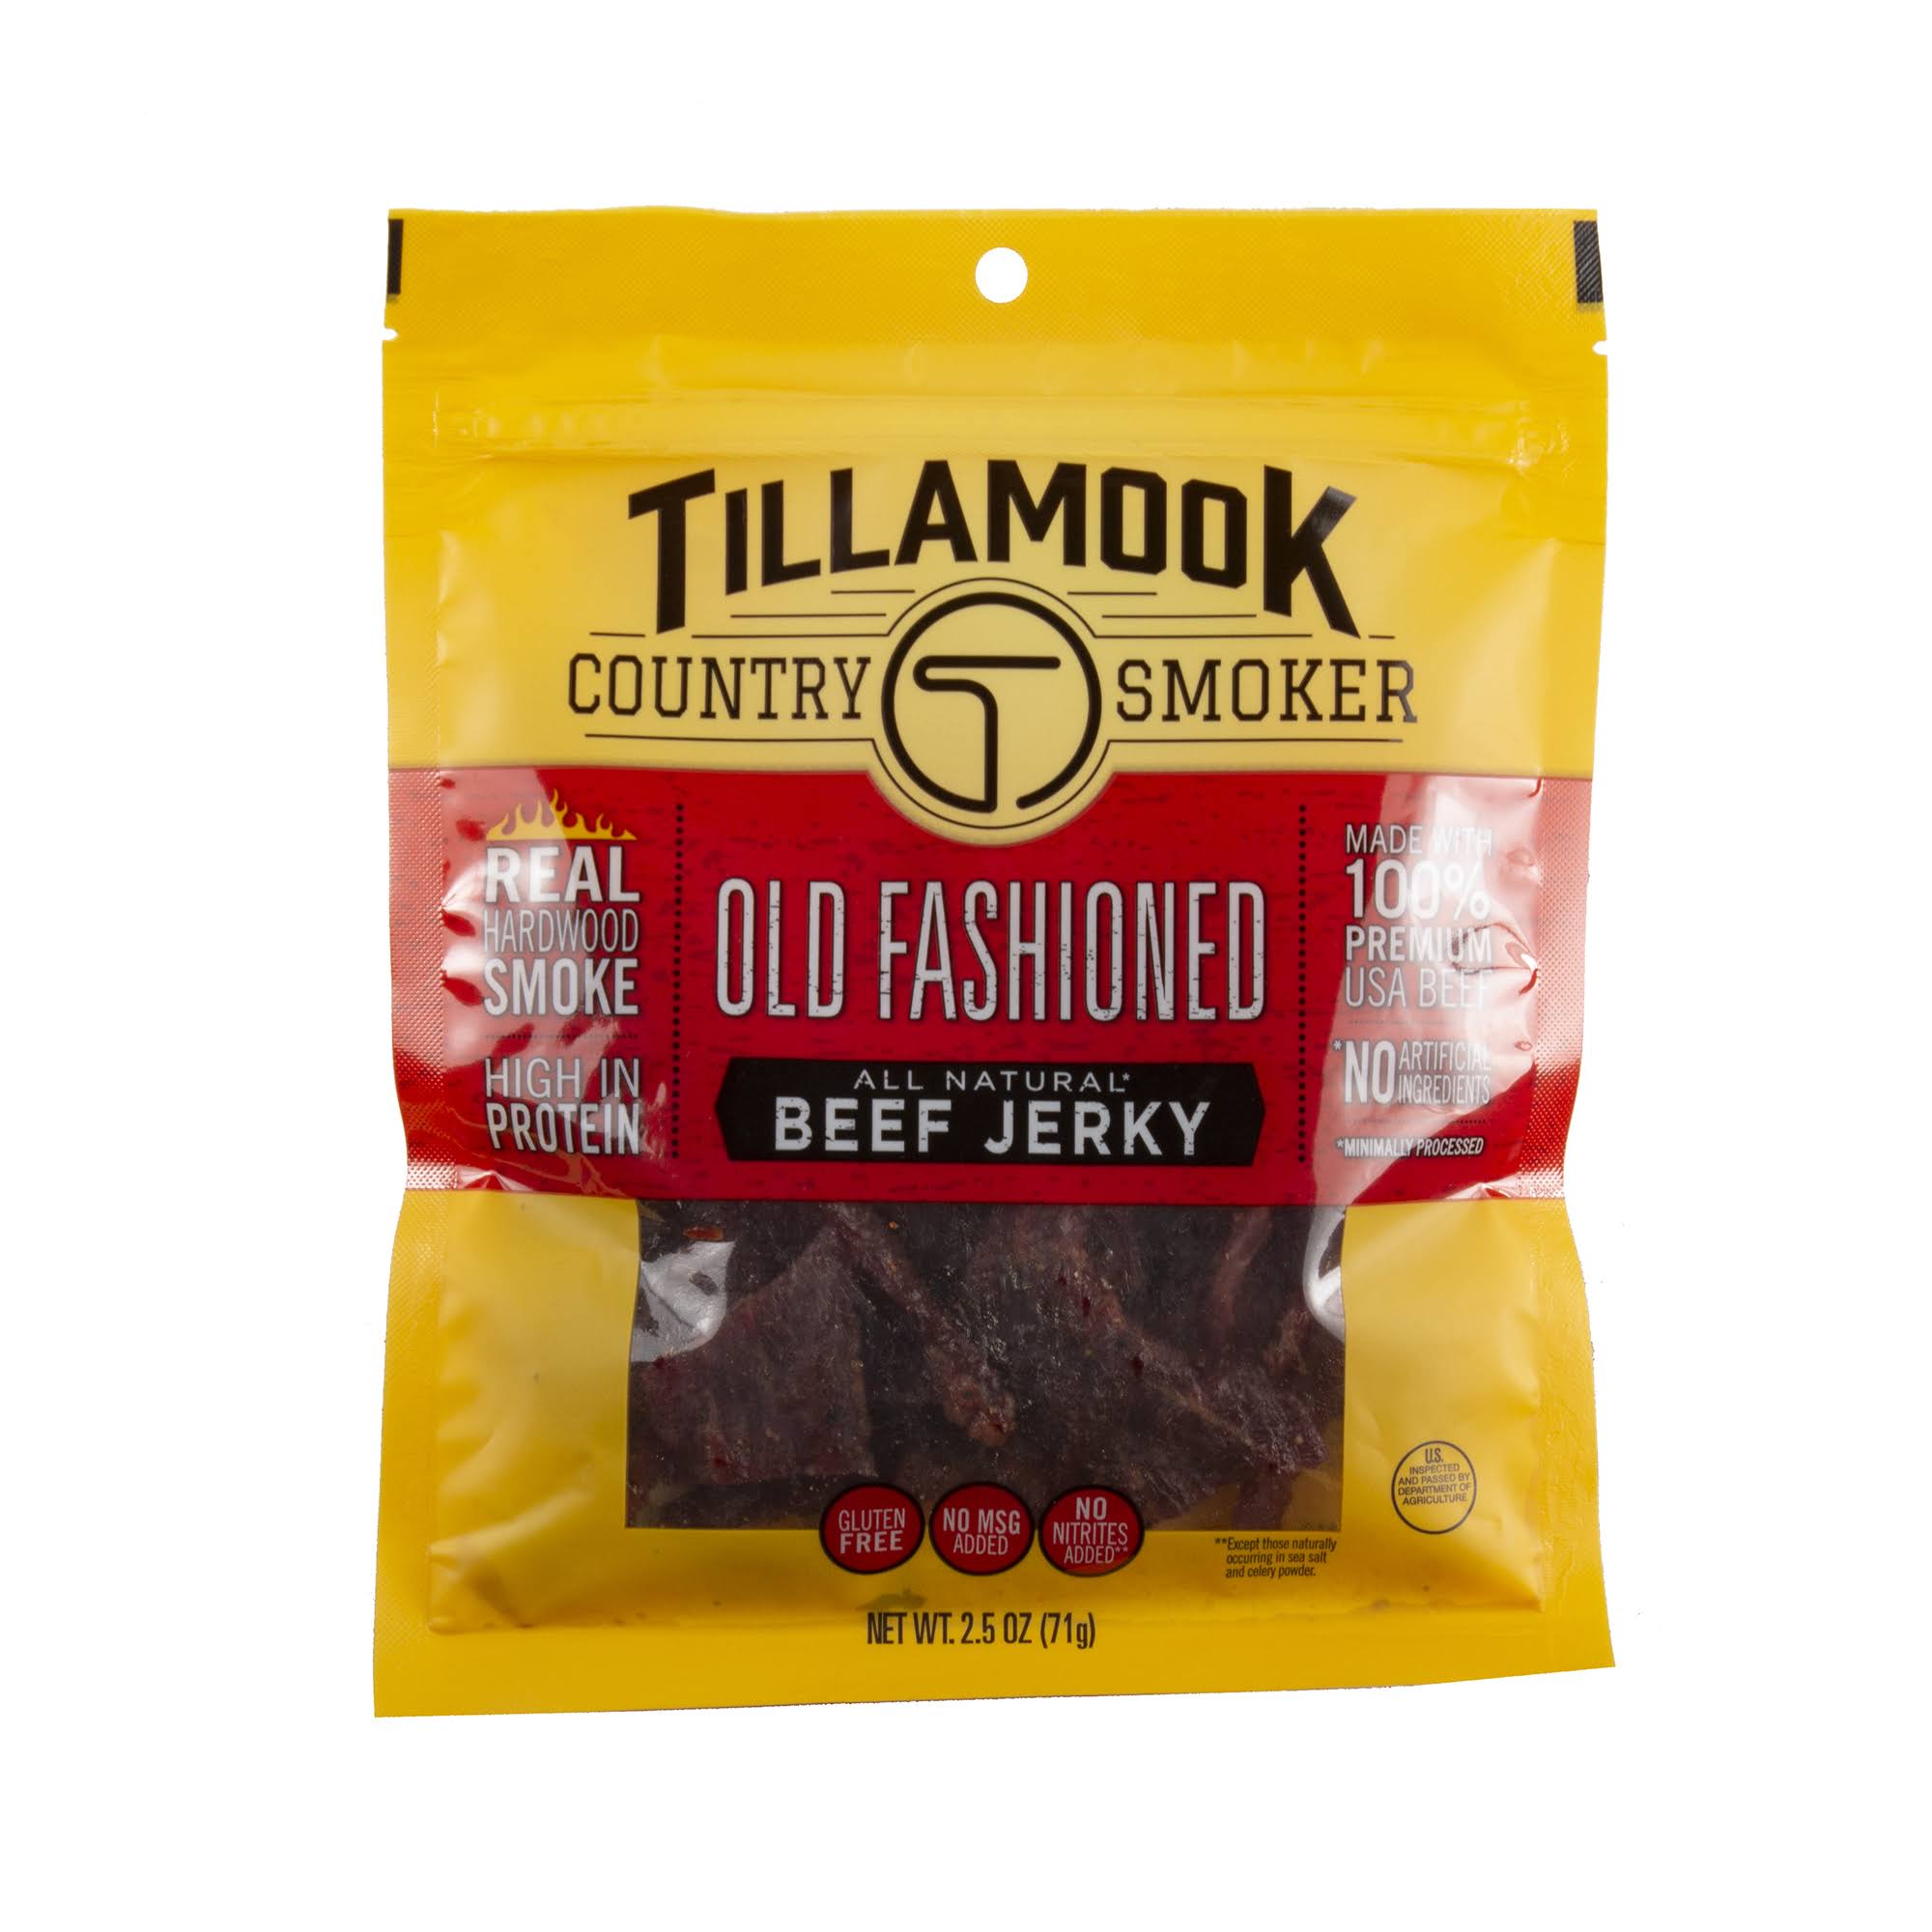 Tillamook Country Smoker Real Hardwood Smoked Beef Jerky, Old Fashioned, 2.5 Ounce